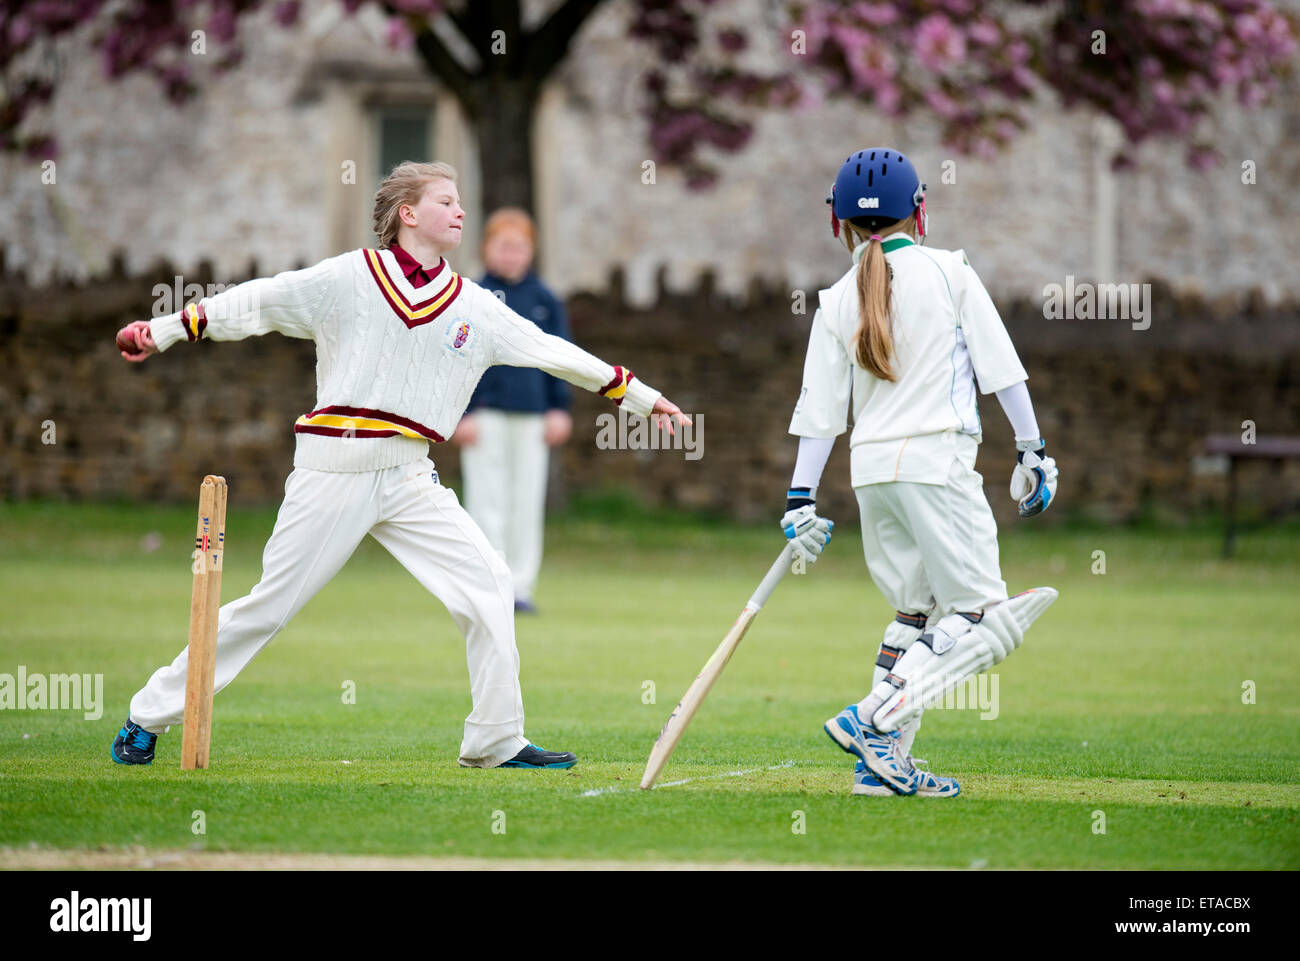 A bowler during a junior girls cricket match in Wiltshire UK Stock Photo